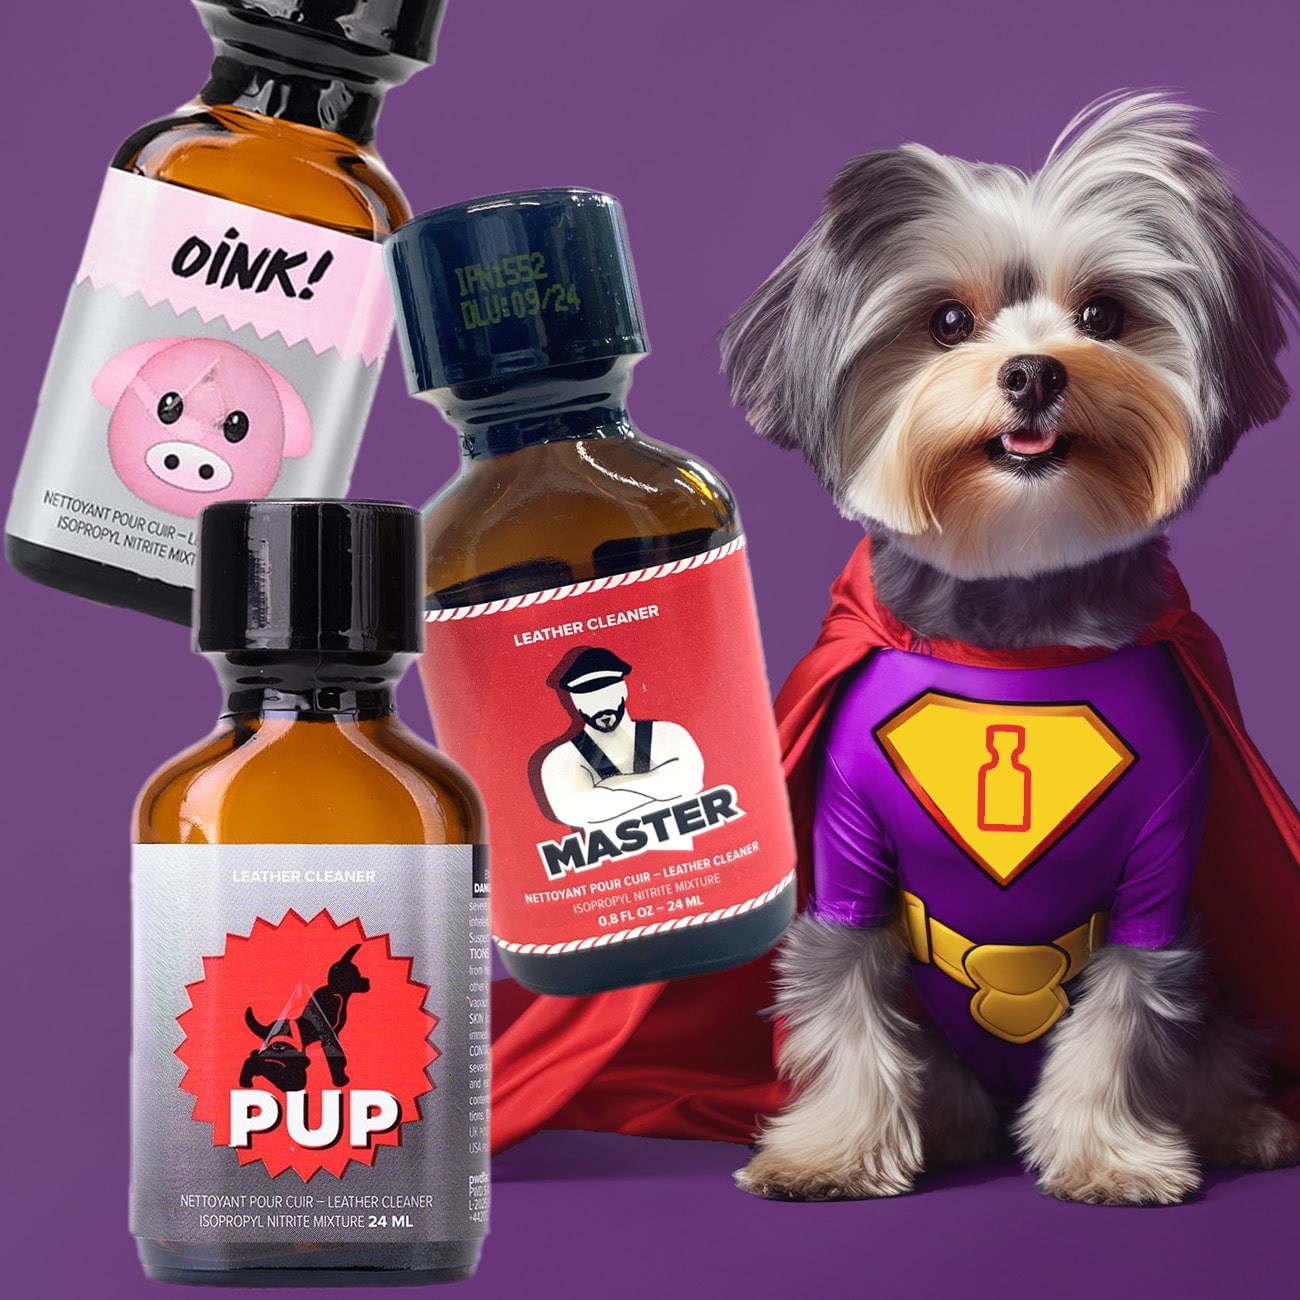 Super-dog to the rescue: safeguarding your leather goods and bringing playful charm to your day as the MasterPup Pack!